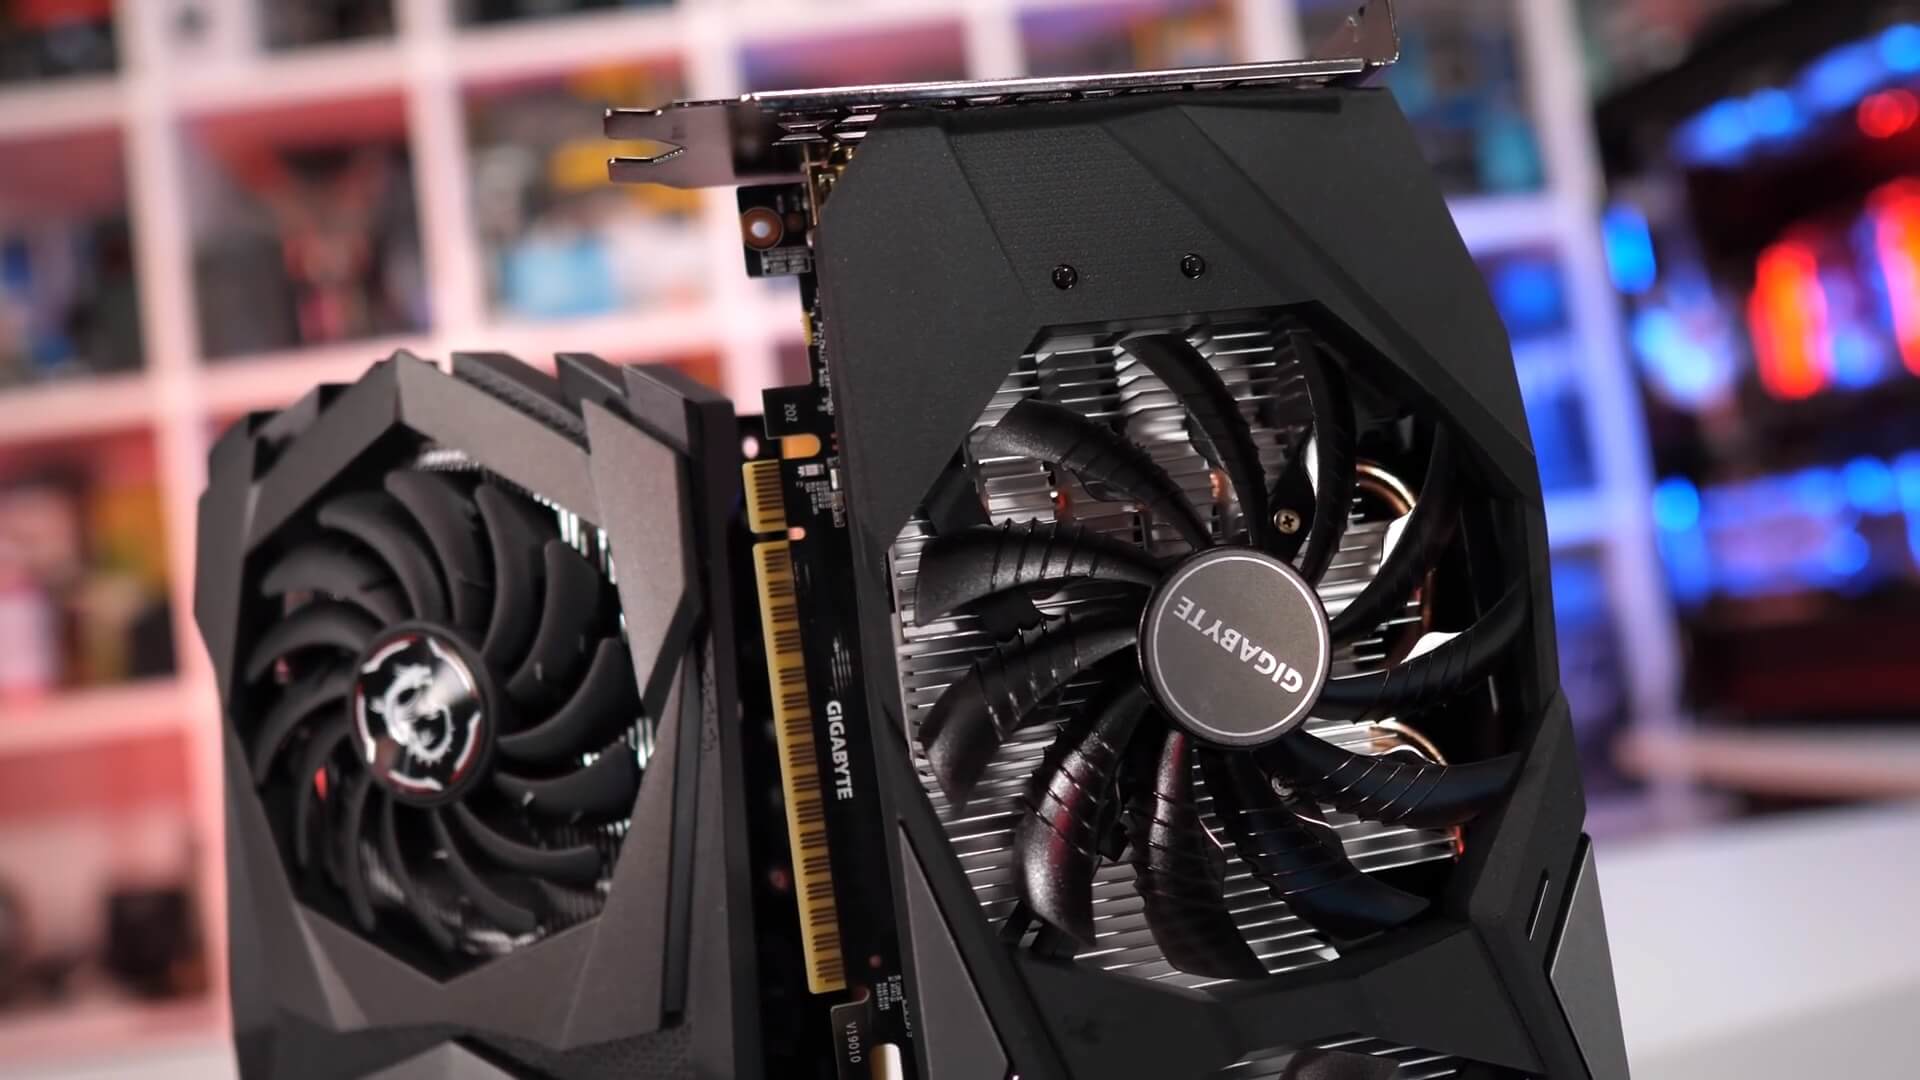 A new graphics card tops the Steam survey for the first time since 2018